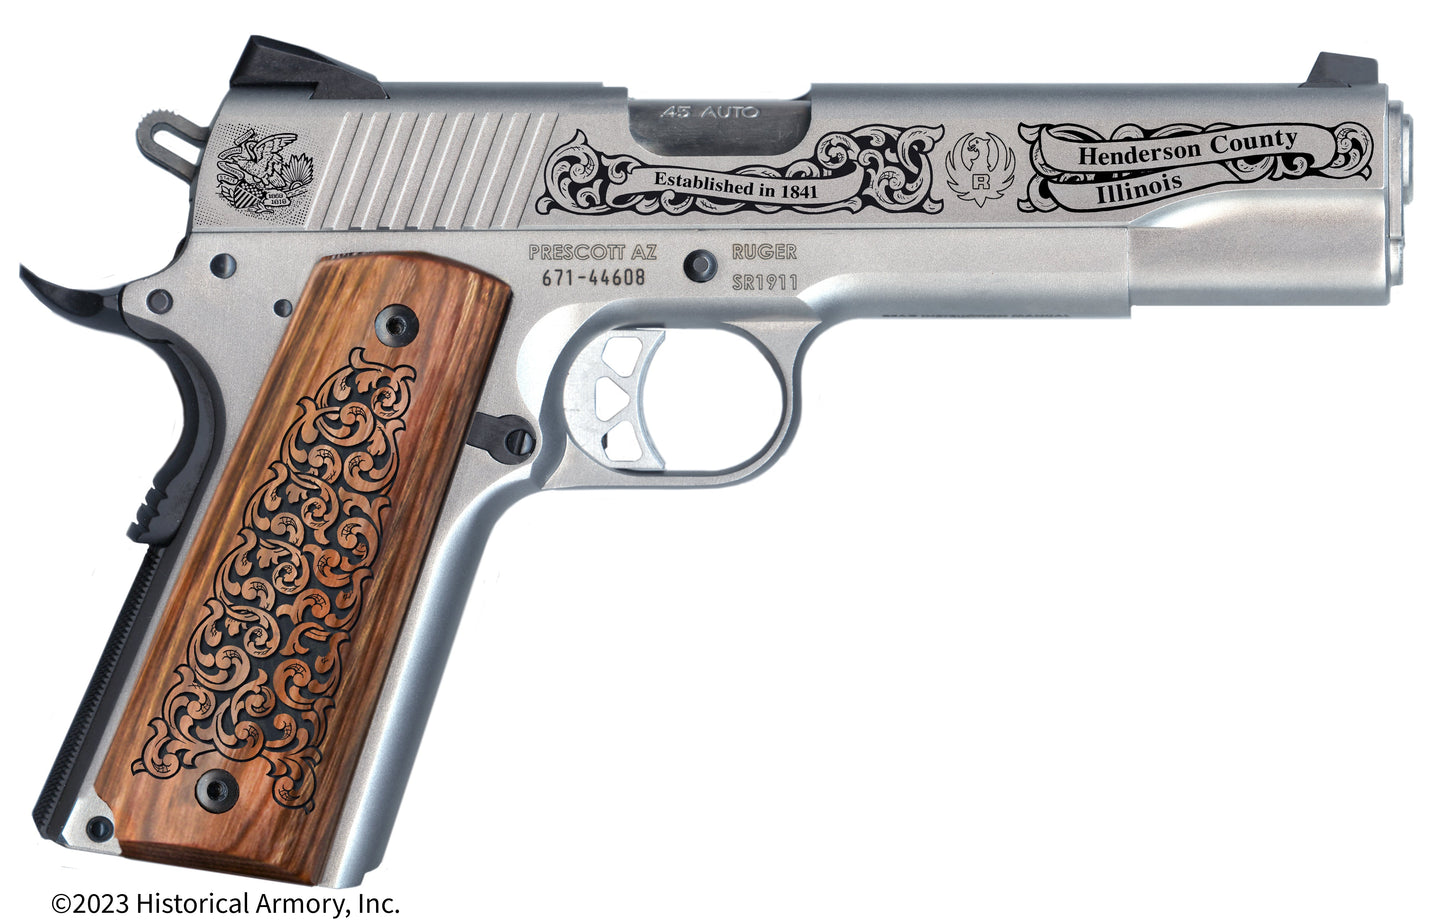 Henderson County Illinois Engraved .45 Auto Ruger 1911